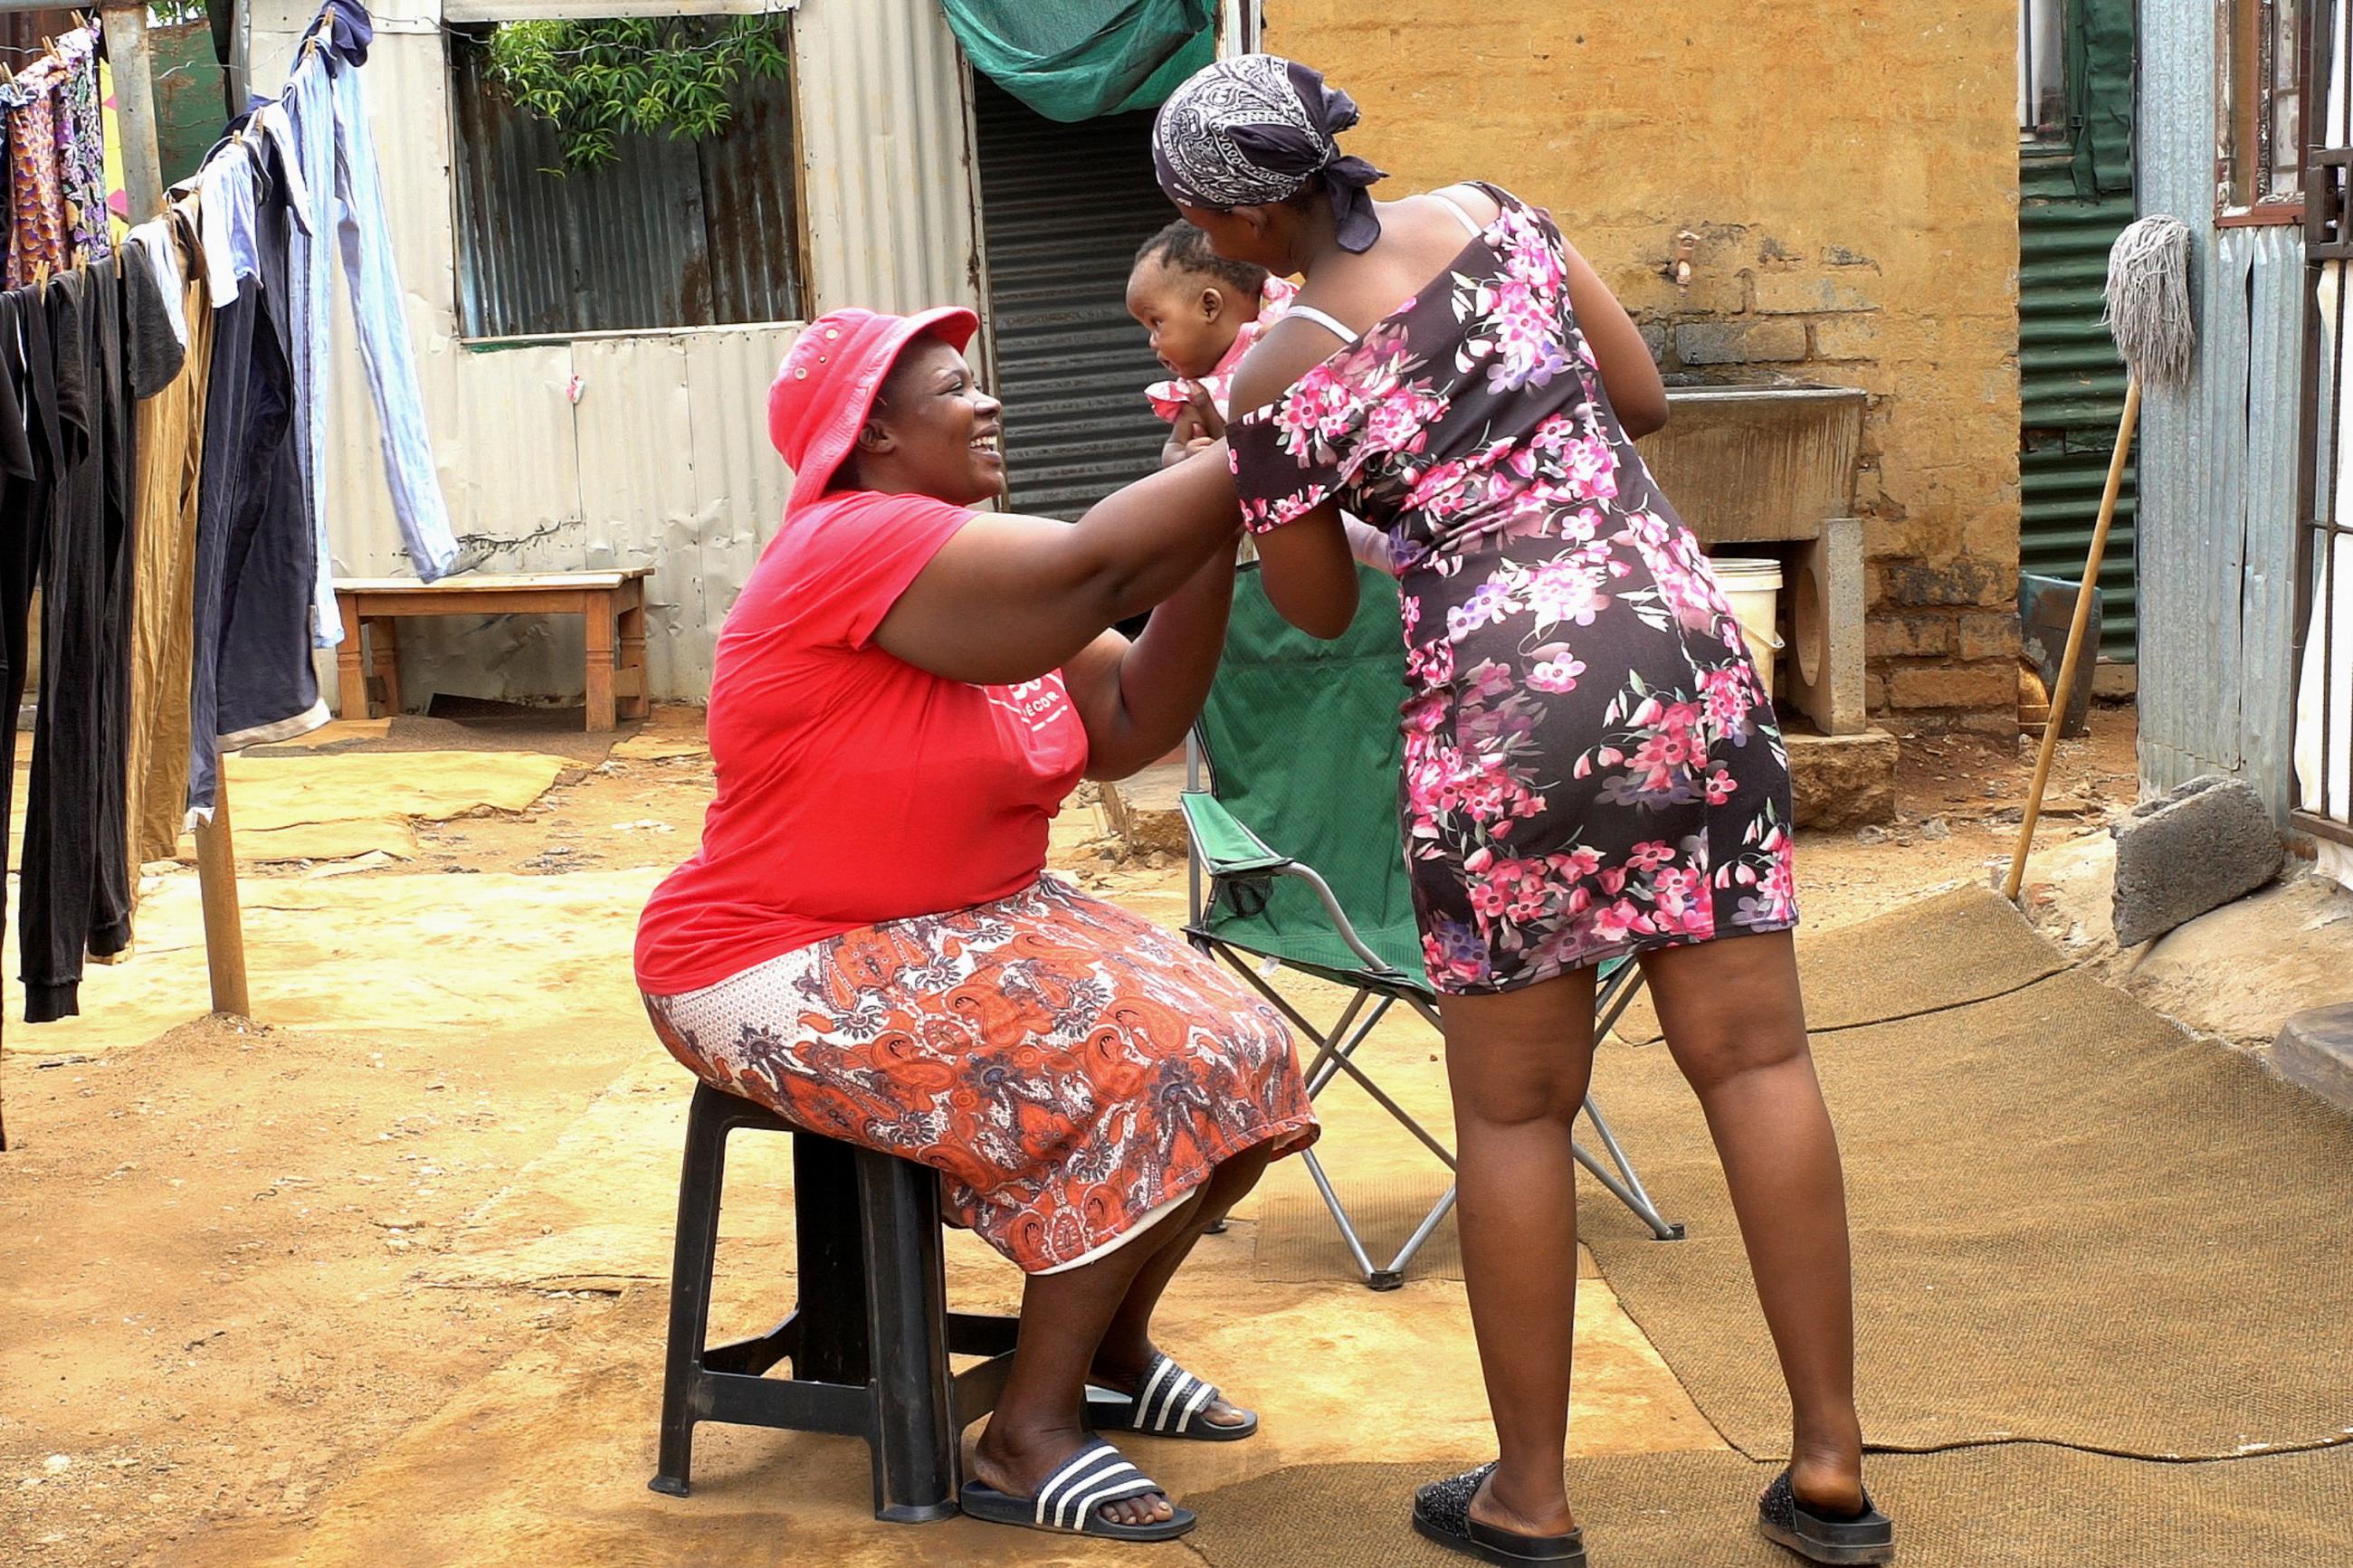 Rebecca Phaka takes her grandchild from her daughter Serena Phaka (15) who struggles to come to terms with the challenges of being a teen mother in Tembisa, South Africa, on August 21, 2022.